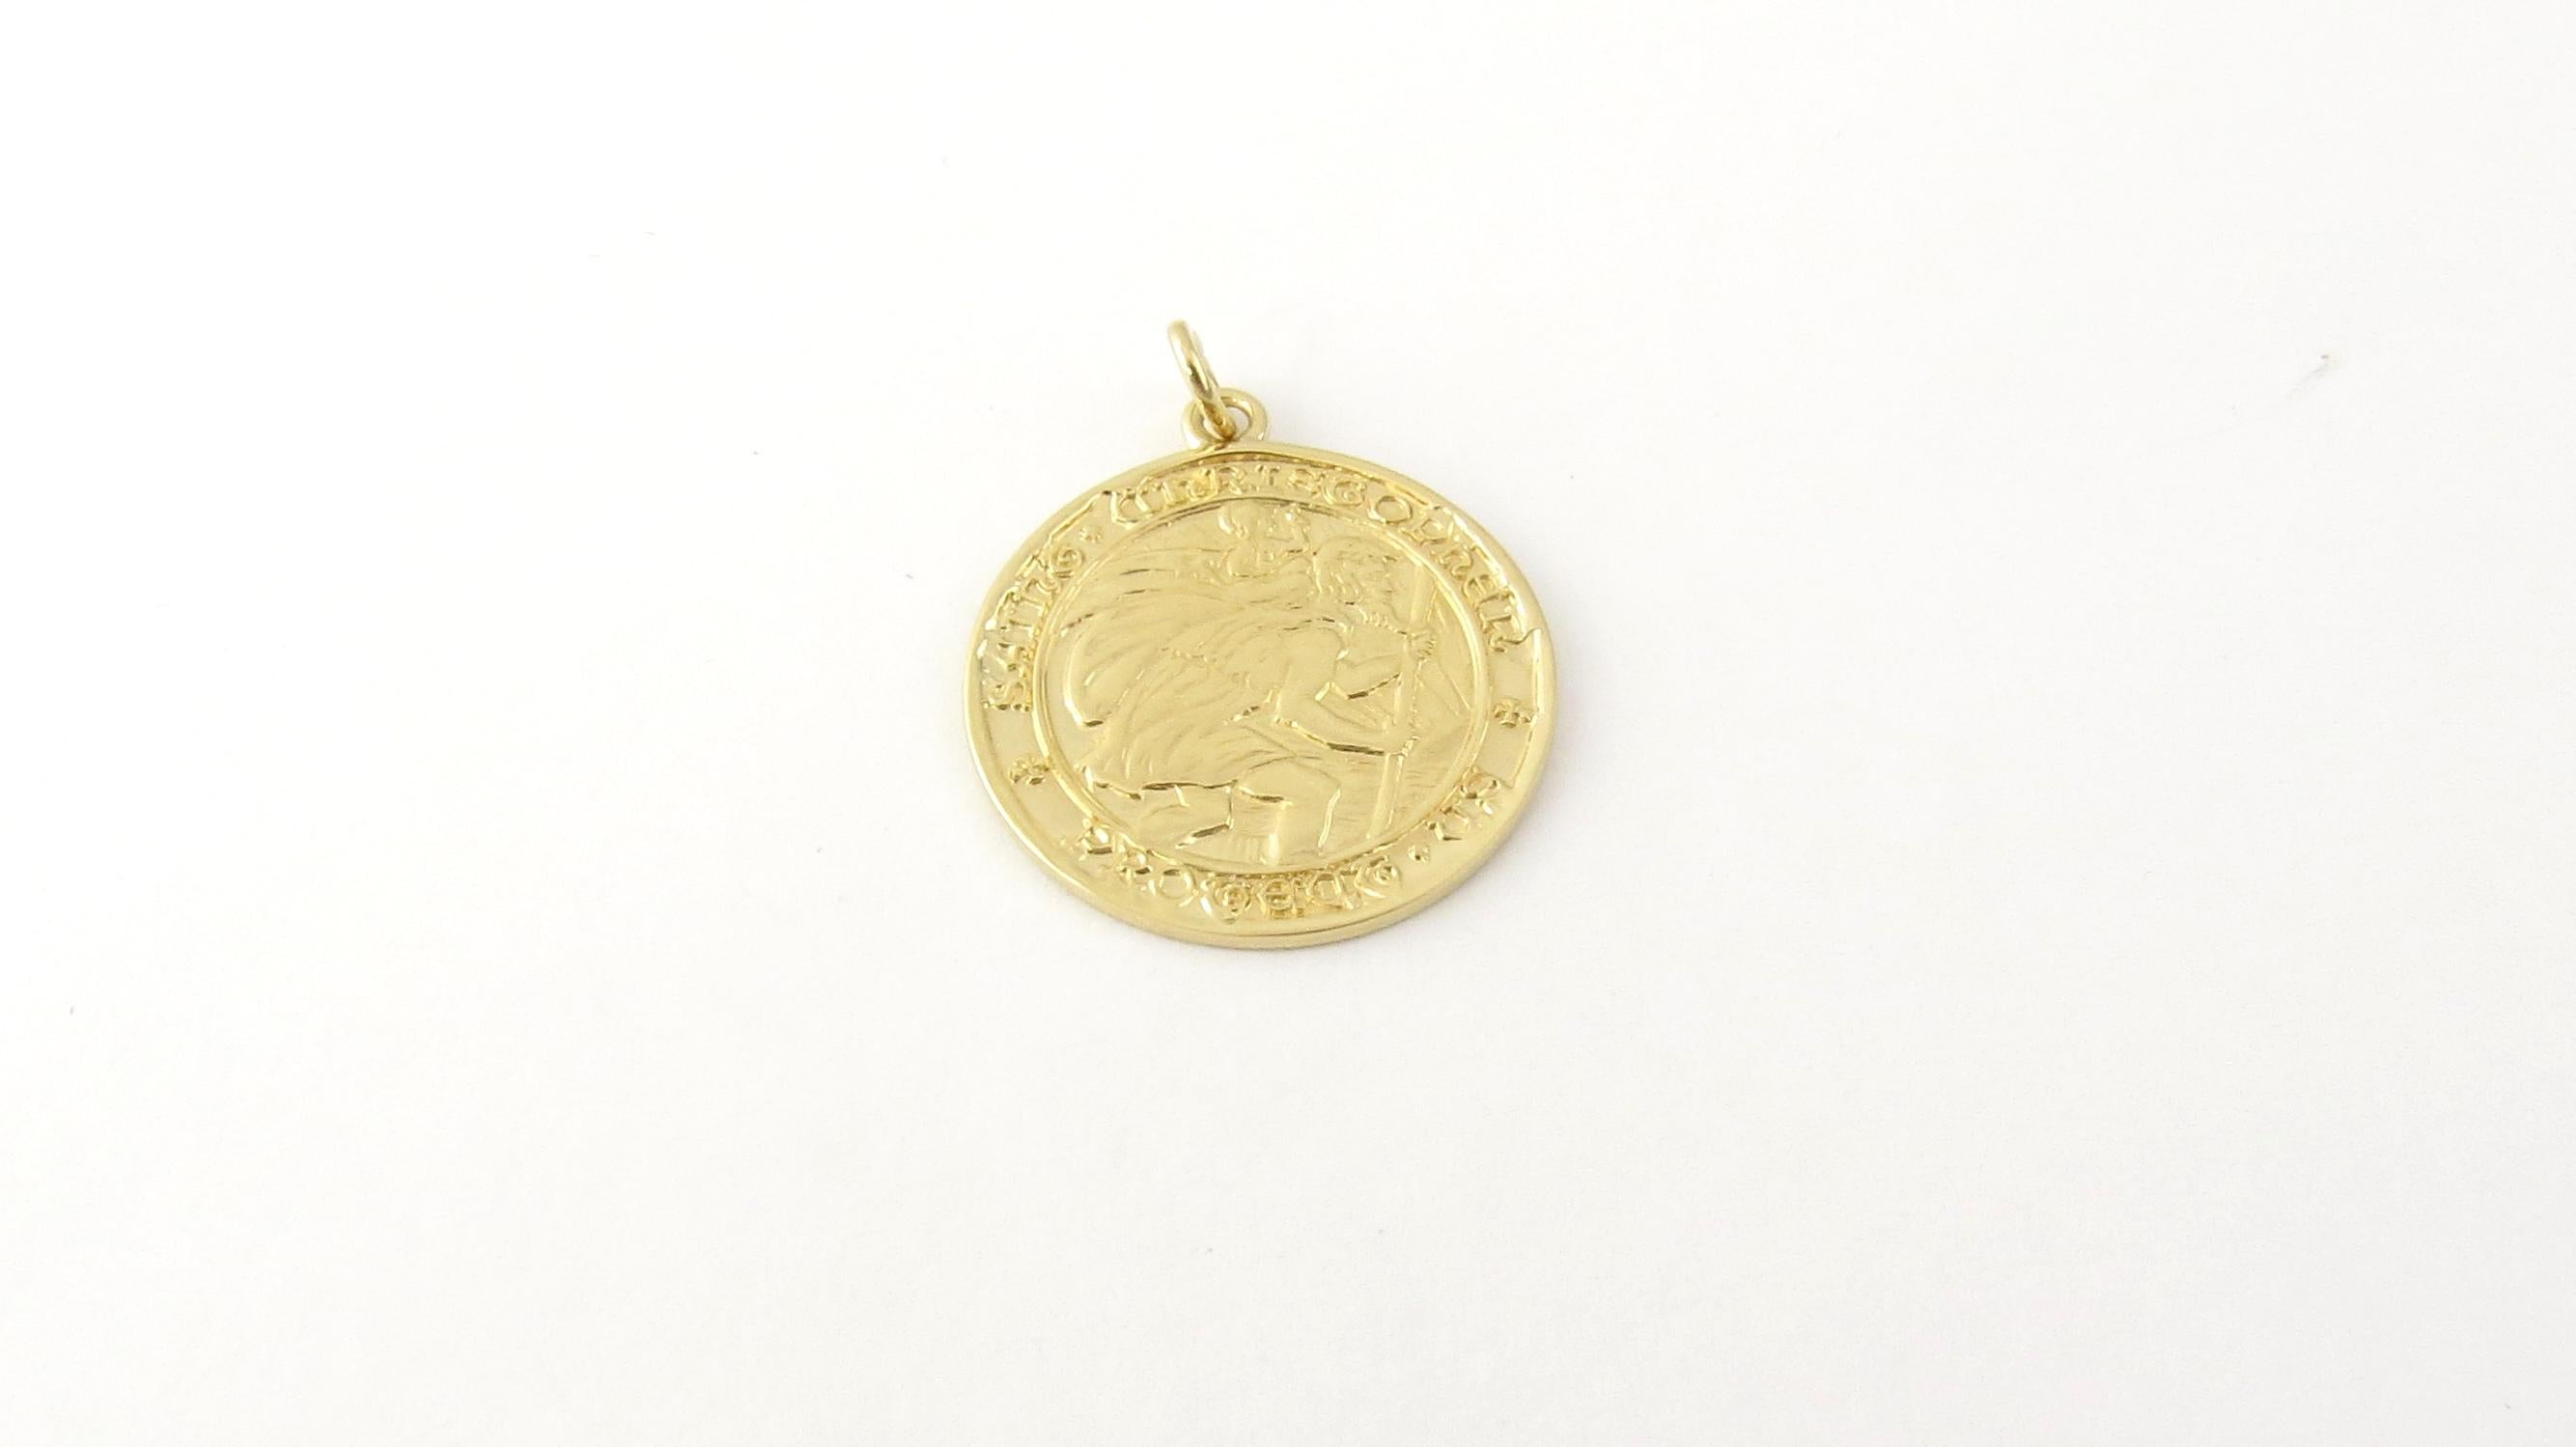 Vintage 14 Karat Yellow Gold St. Christopher Pendant

This lovely St. Christopher pendant is crafted in meticulously detailed 14K yellow gold.

Size: 21 mm x 19 mm (actual pendant)

Weight: 1.6 dwt. / 2.5 gr.

Stamped: 14K

Very good condition,